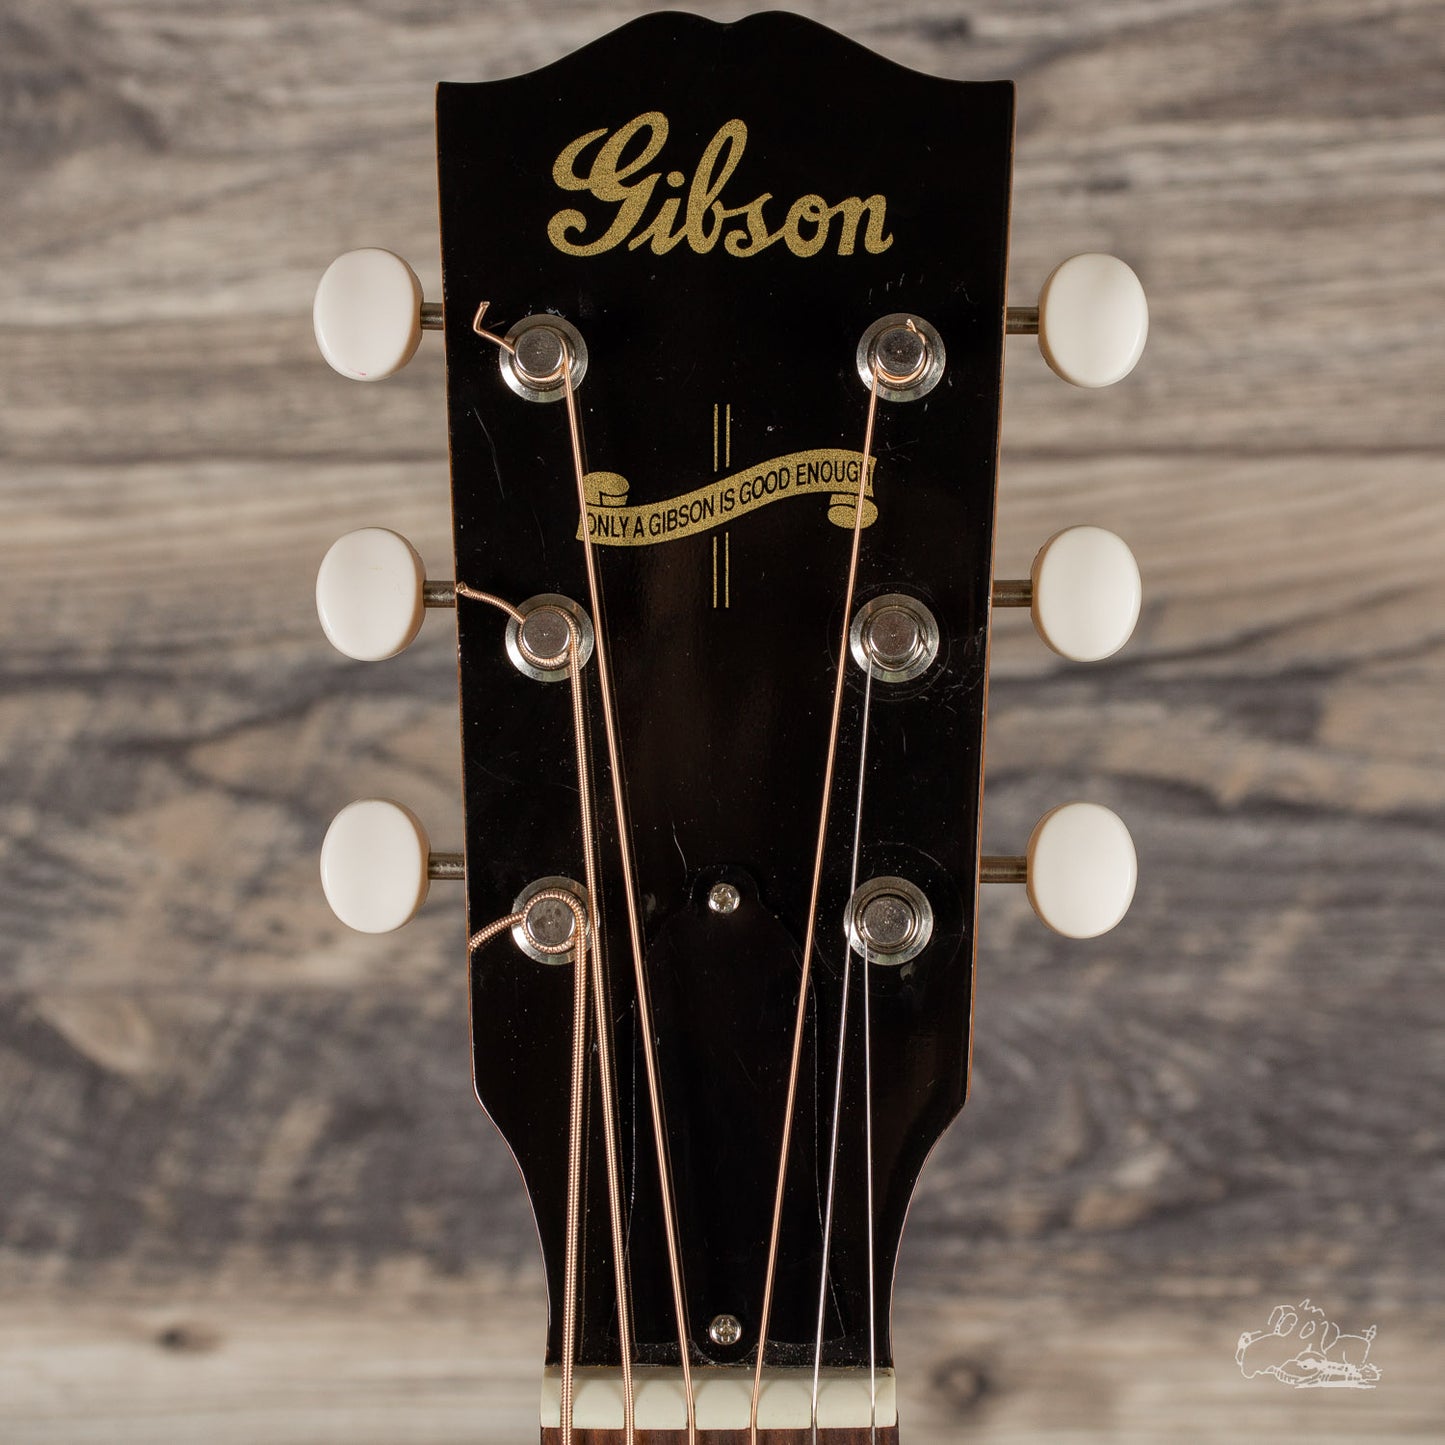 2013 Gibson J-35 w/ Spruce Top and Mahogany Back & Sides